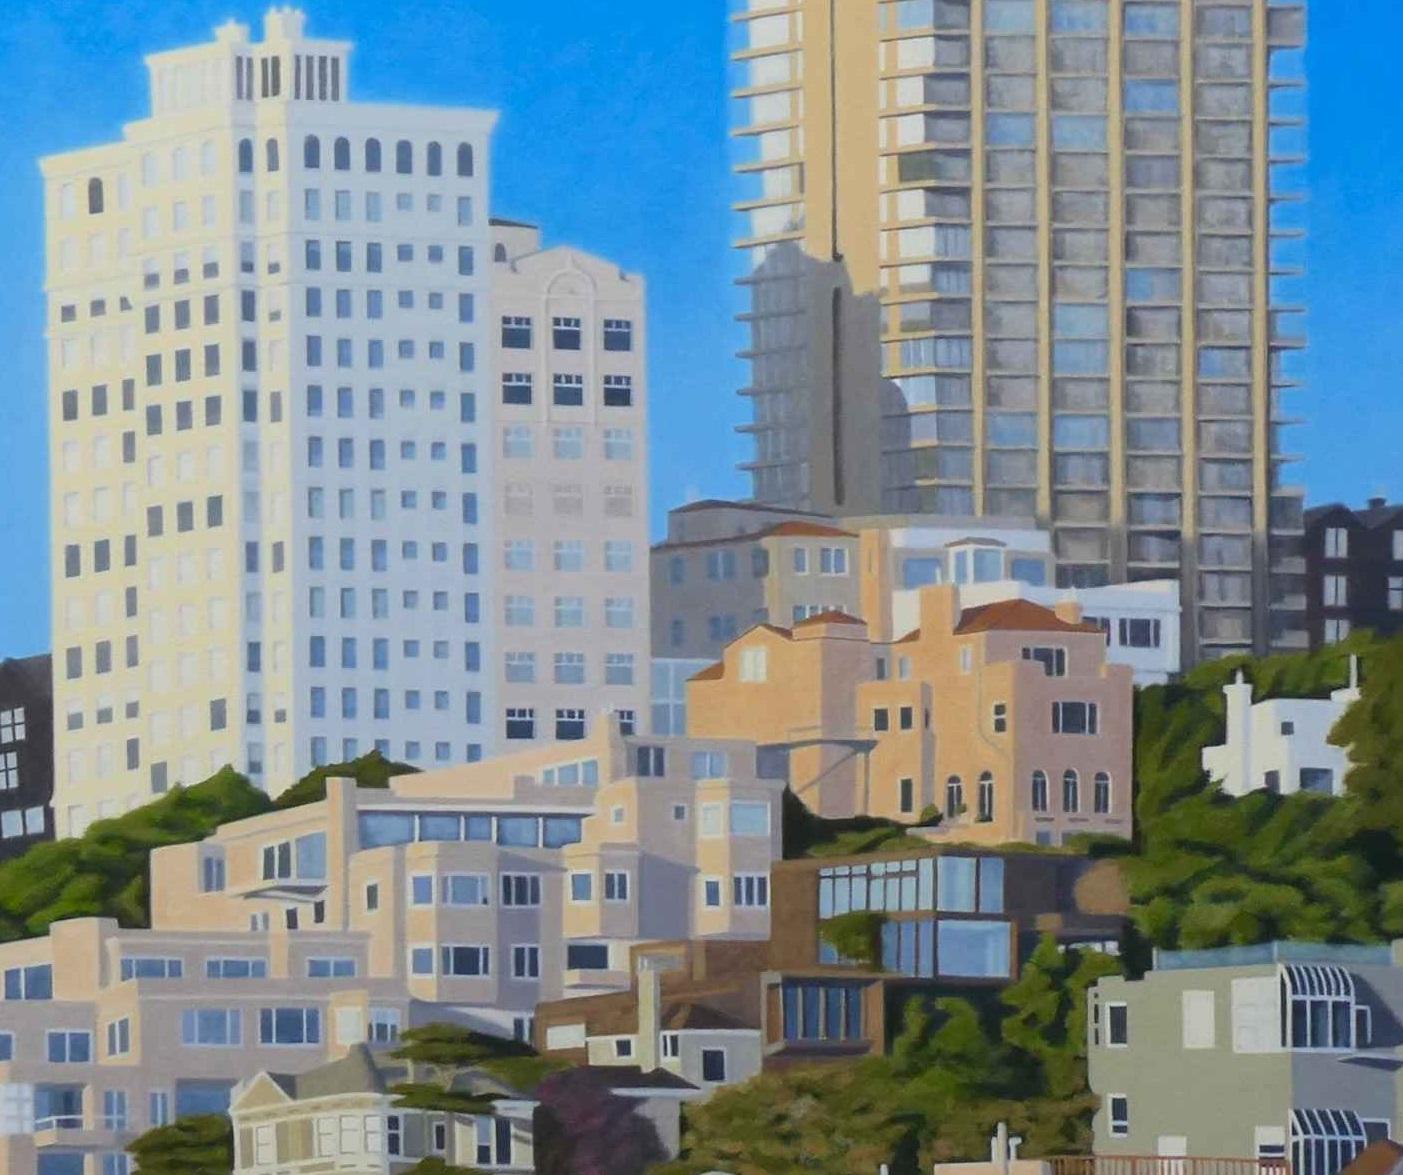 Russian Hill - Painting by Catherine Palmer